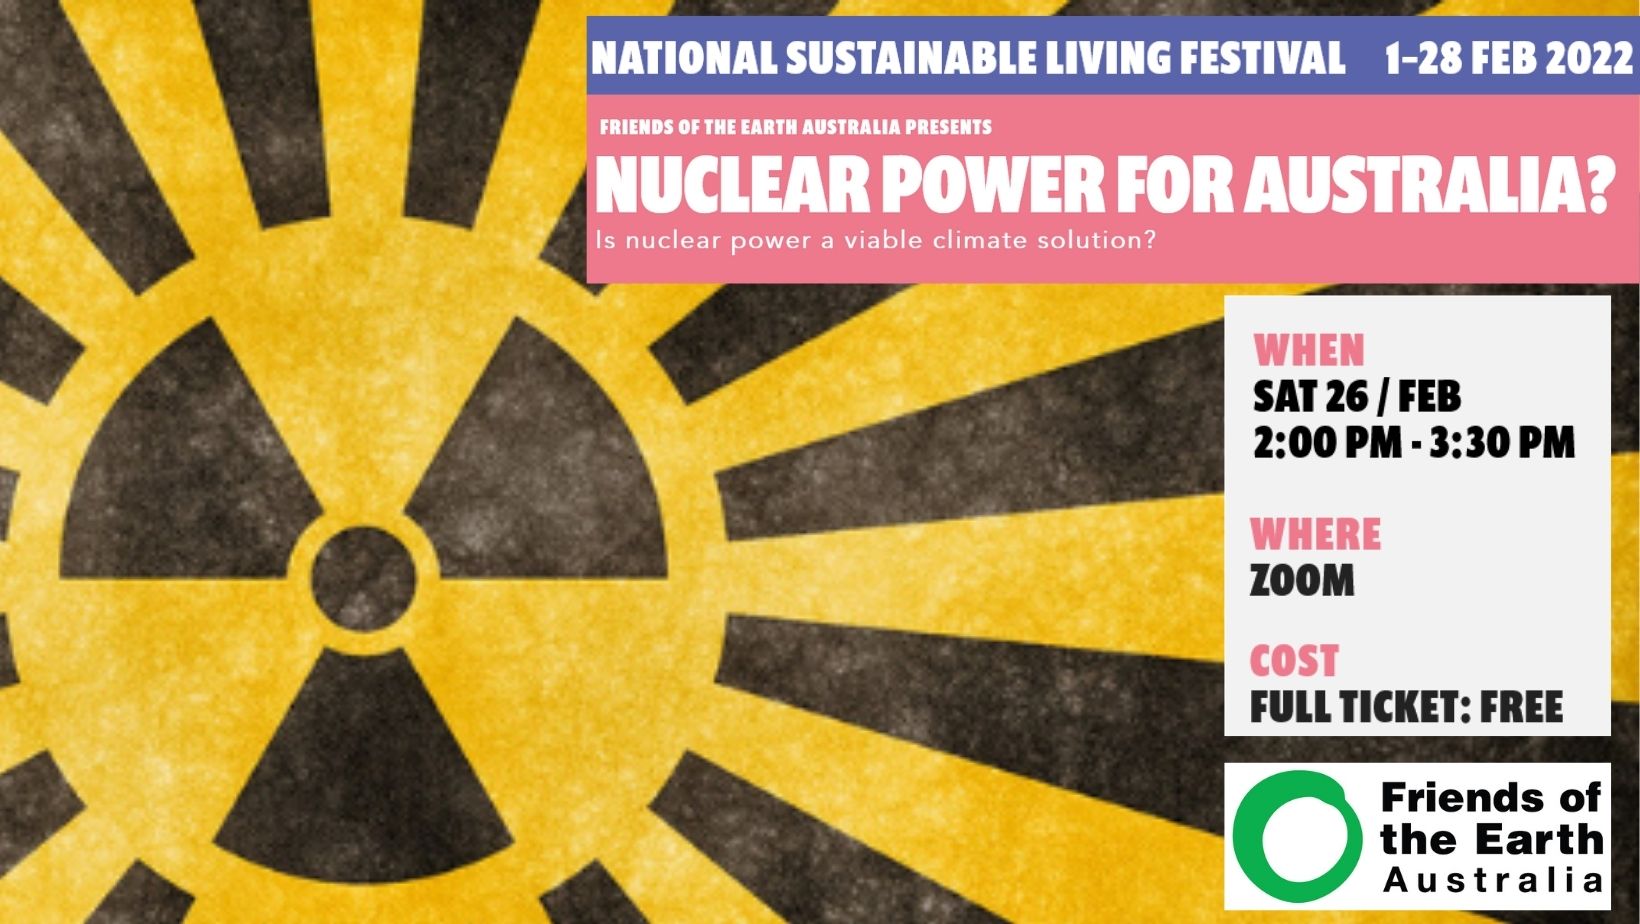 Image of nuclear symbol in yellow and black, with writing on left that reads - Sustainable Living Festival 1-28 February, Friends of the Earth Australia presents: Nuclear power for Australia, Is nuclear power a viable climate solution? When: Sat 26 Feb, 2pm-3:30pm, Where: zoom, cost: free. The Friends of the Earth logo of a green circle is in the bottom right corner.